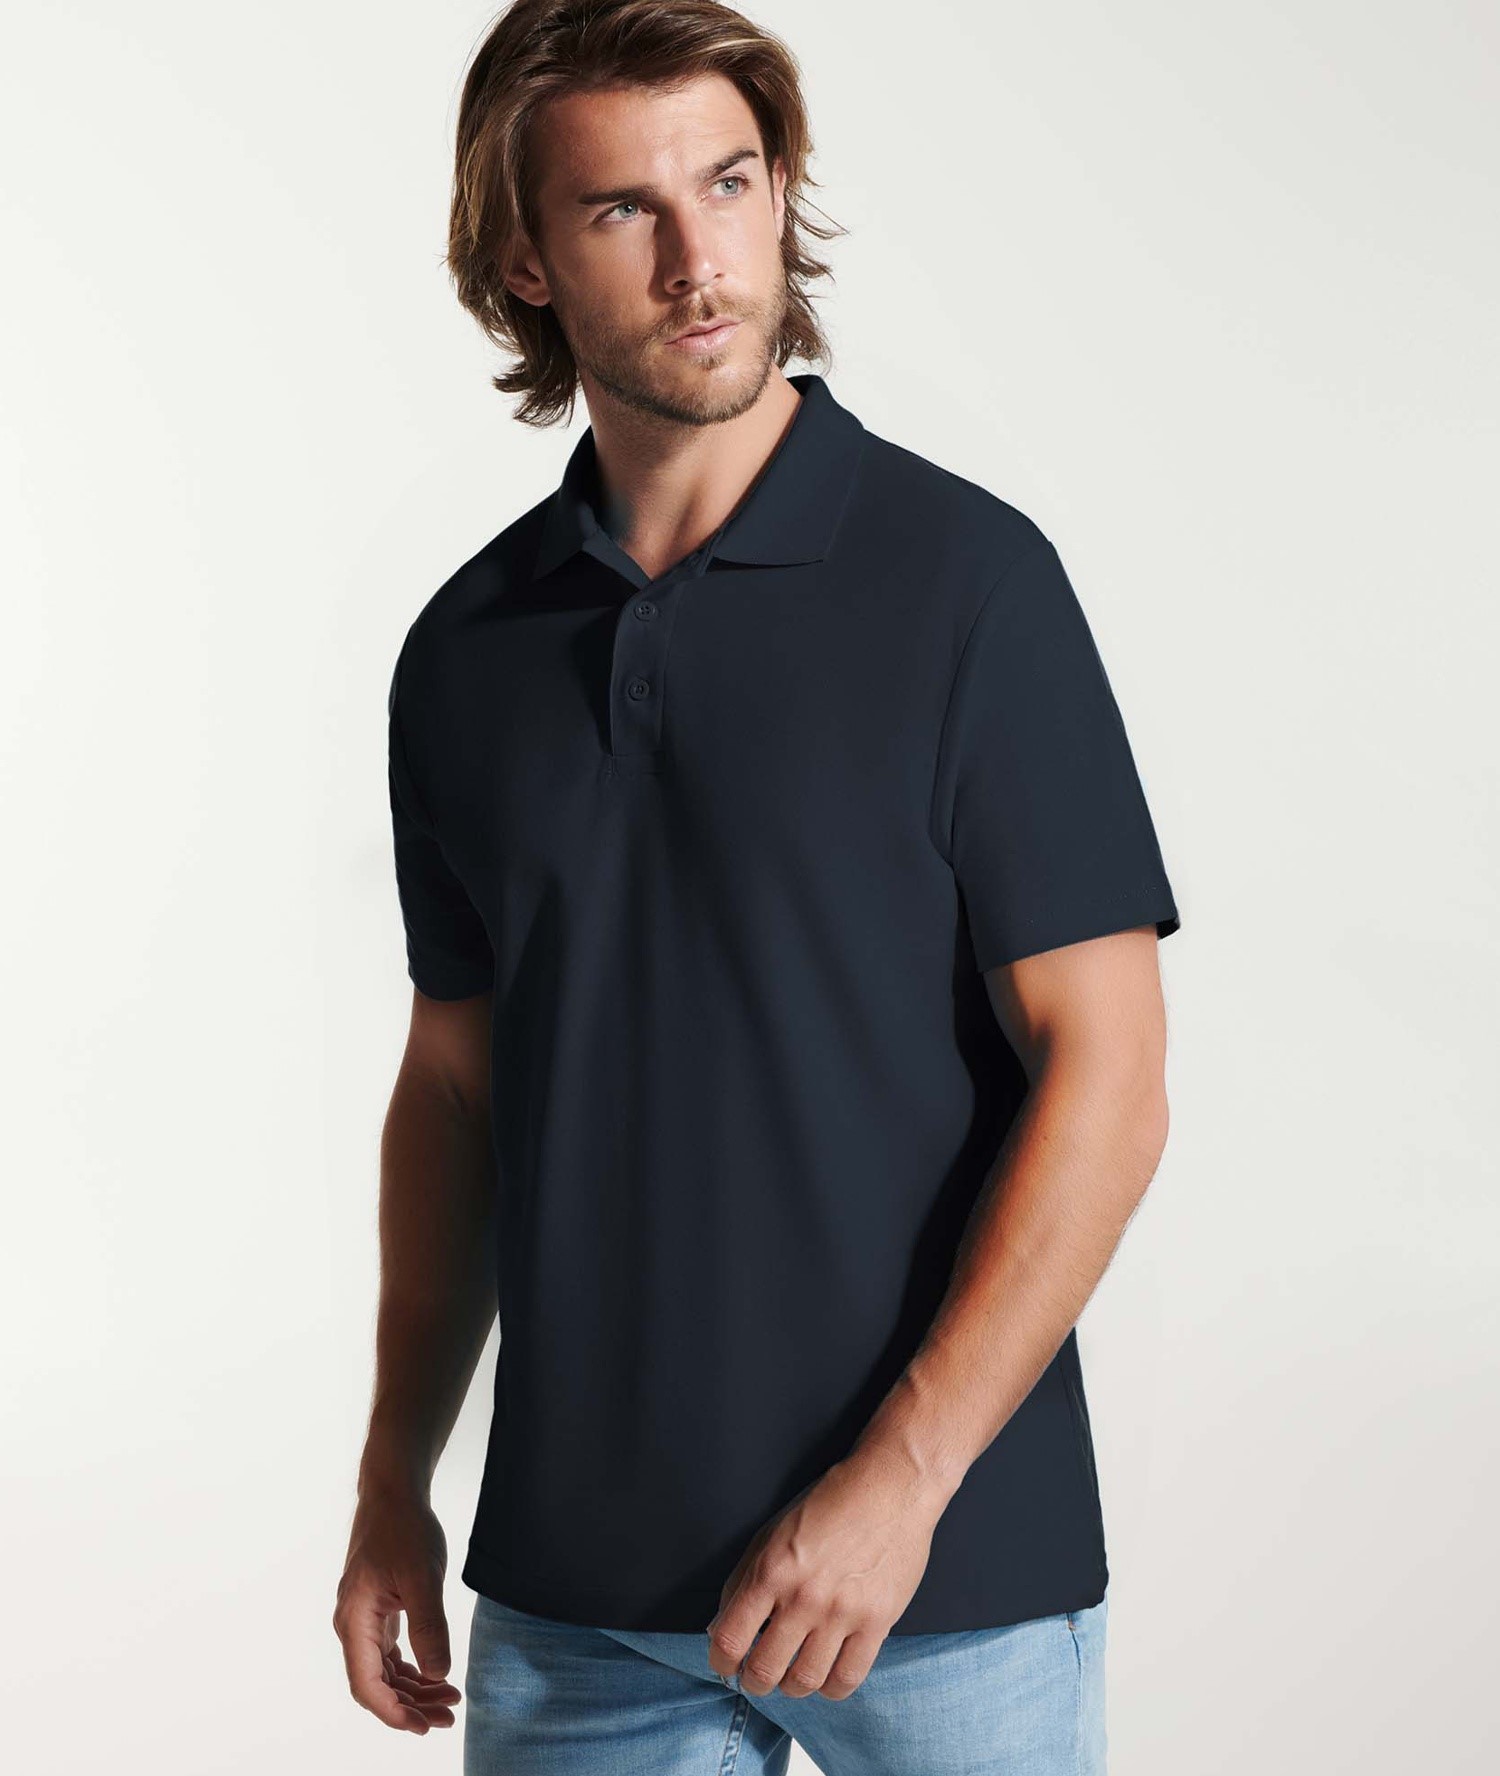 POLO-SHIRT ROLY AUSTRAL